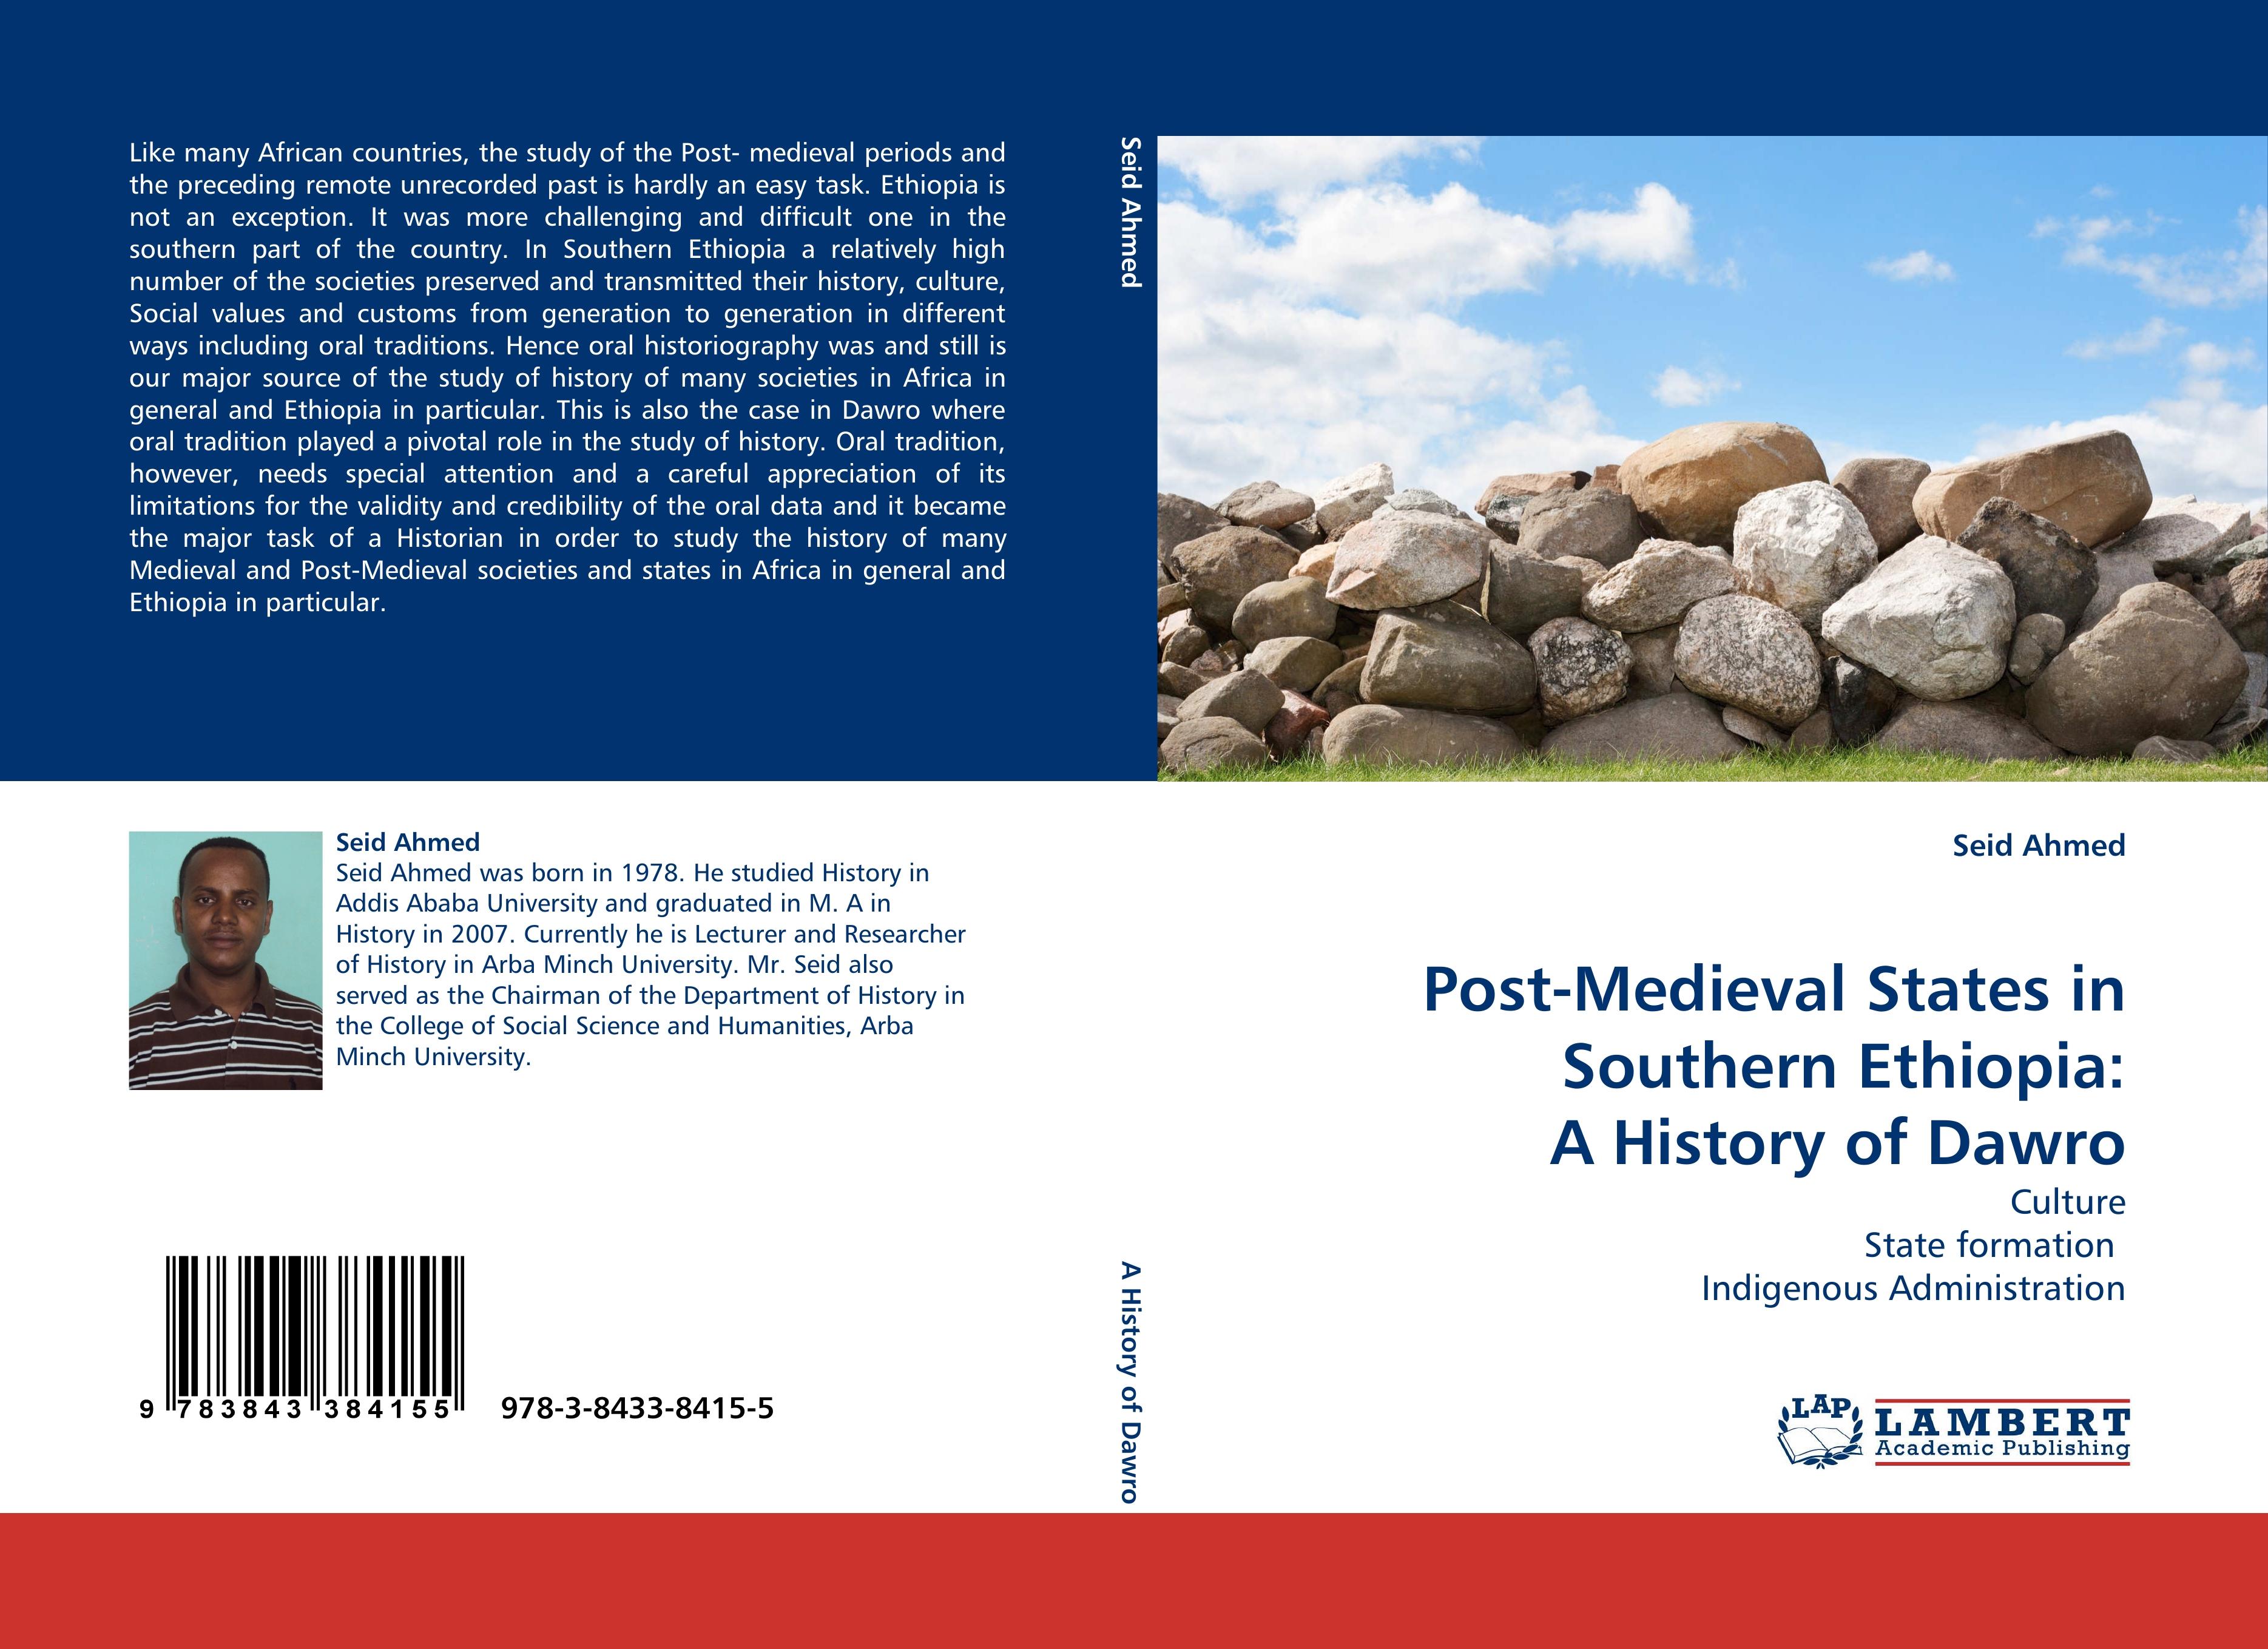 Post-Medieval States in Southern Ethiopia: A History of Dawro - Seid Ahmed